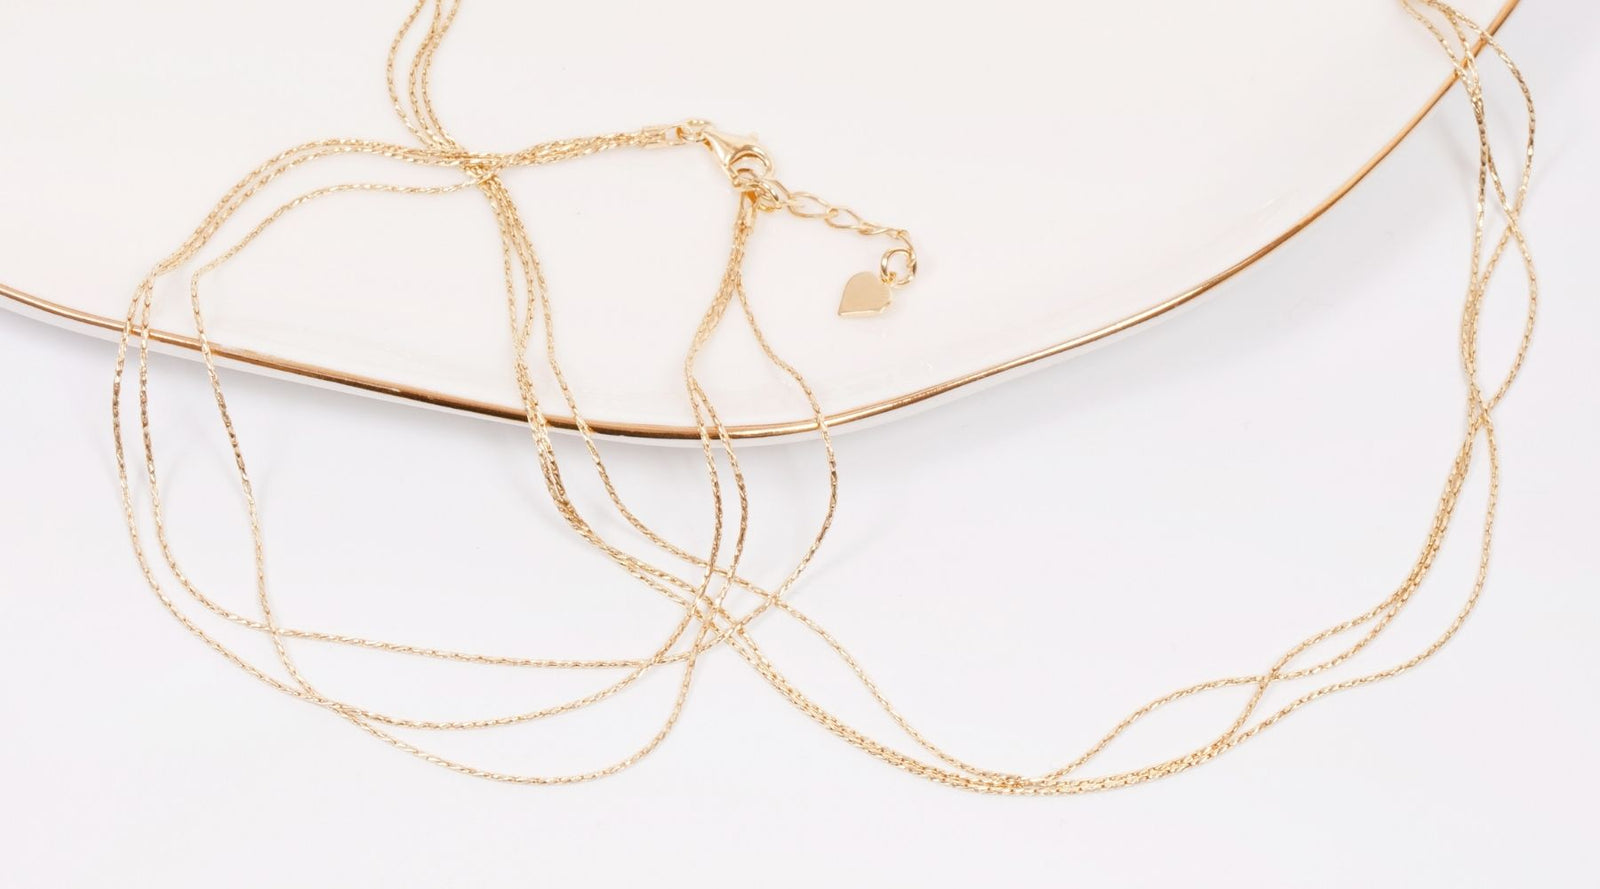 Six Tips for Buying Designer Jewelry Online